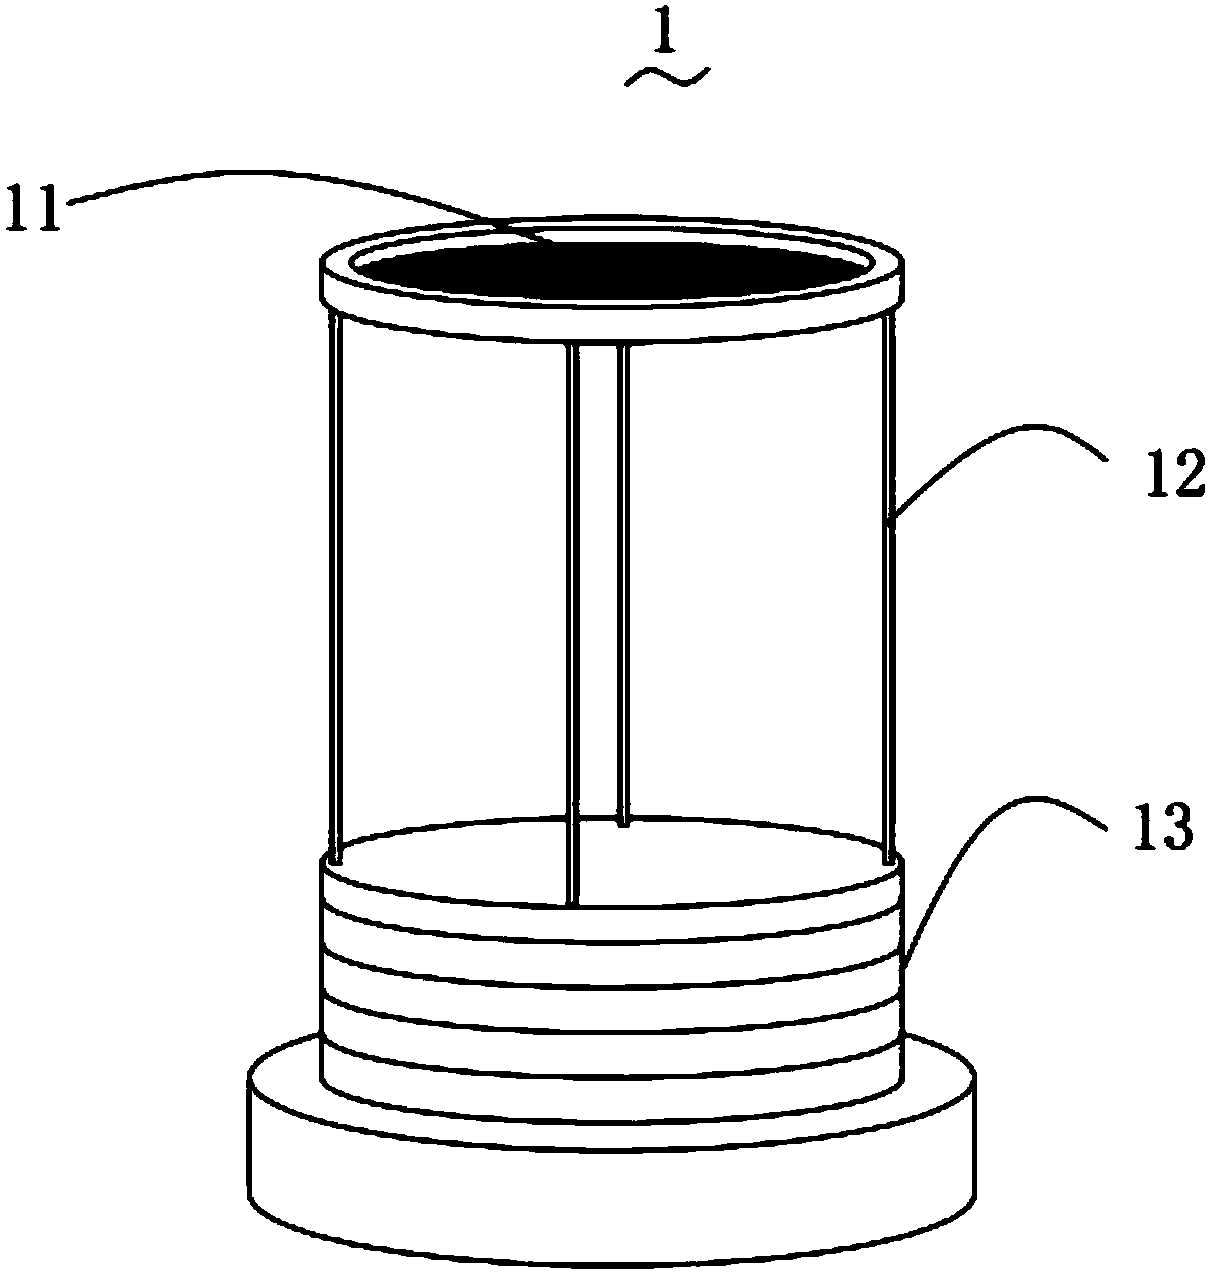 Supercritical fluid extracting device